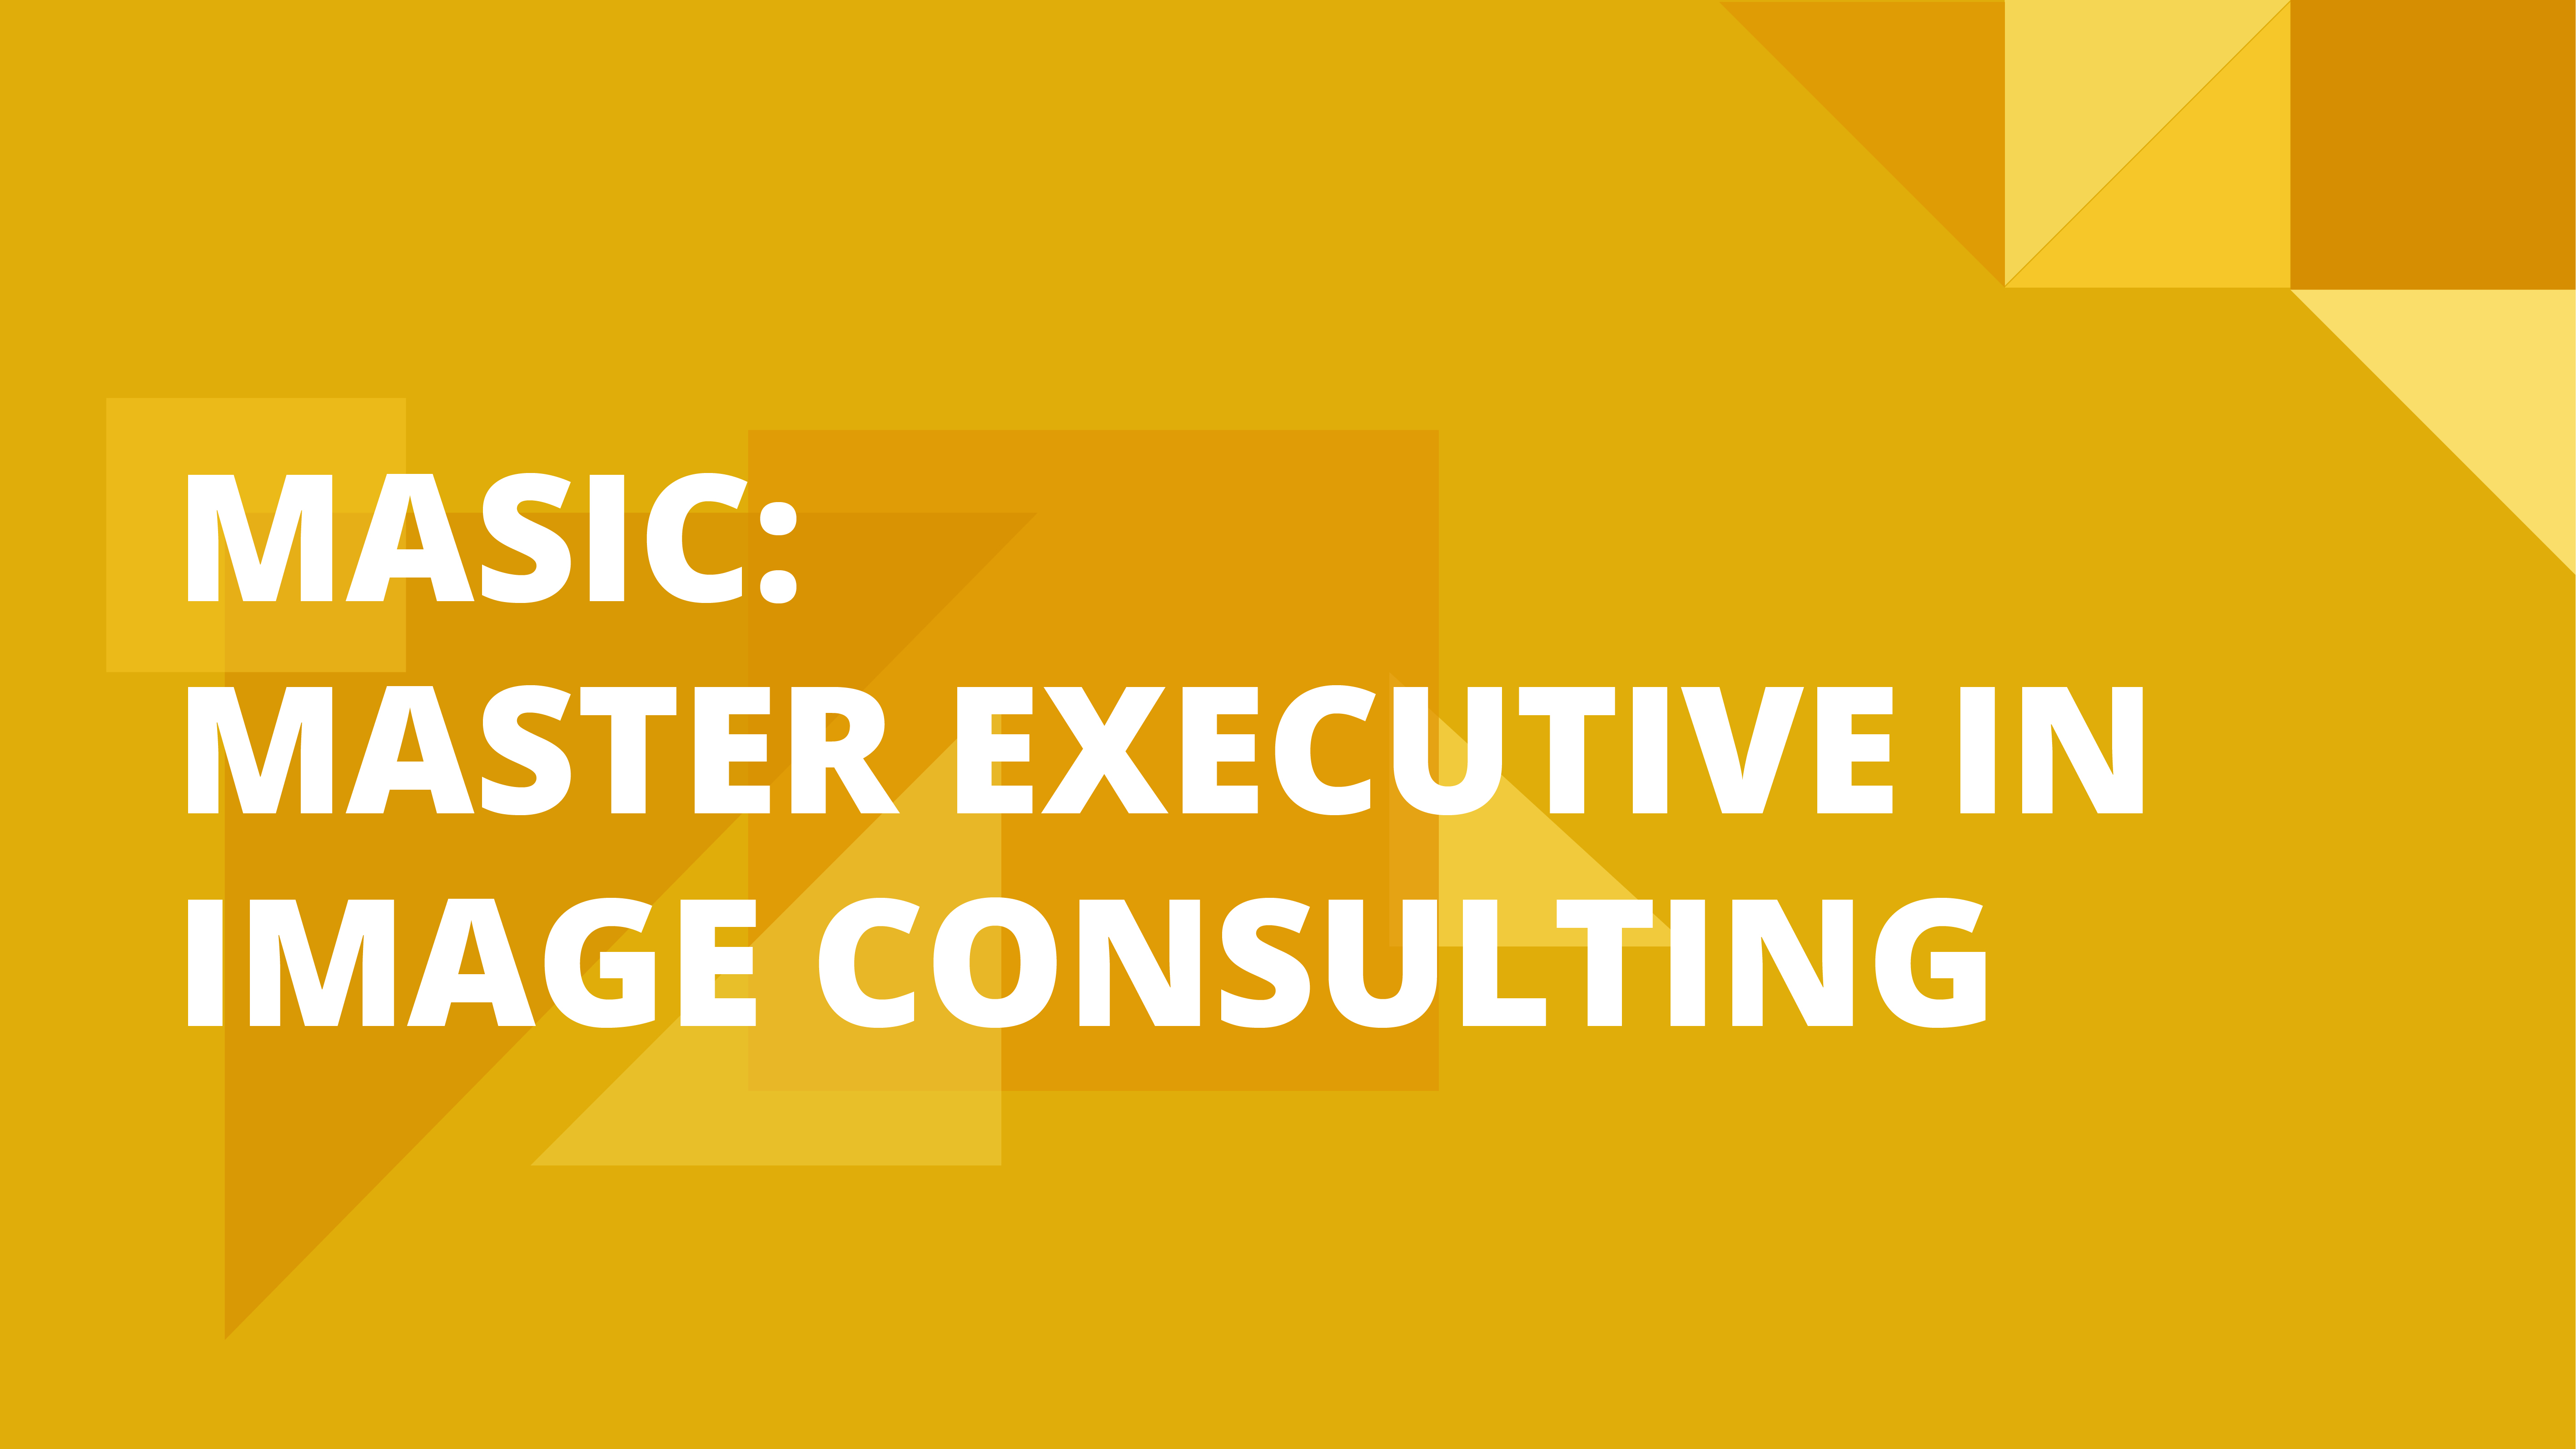 Corso-Online-Masic-Master-Executive-in-Image-Consulting-Life-Learning